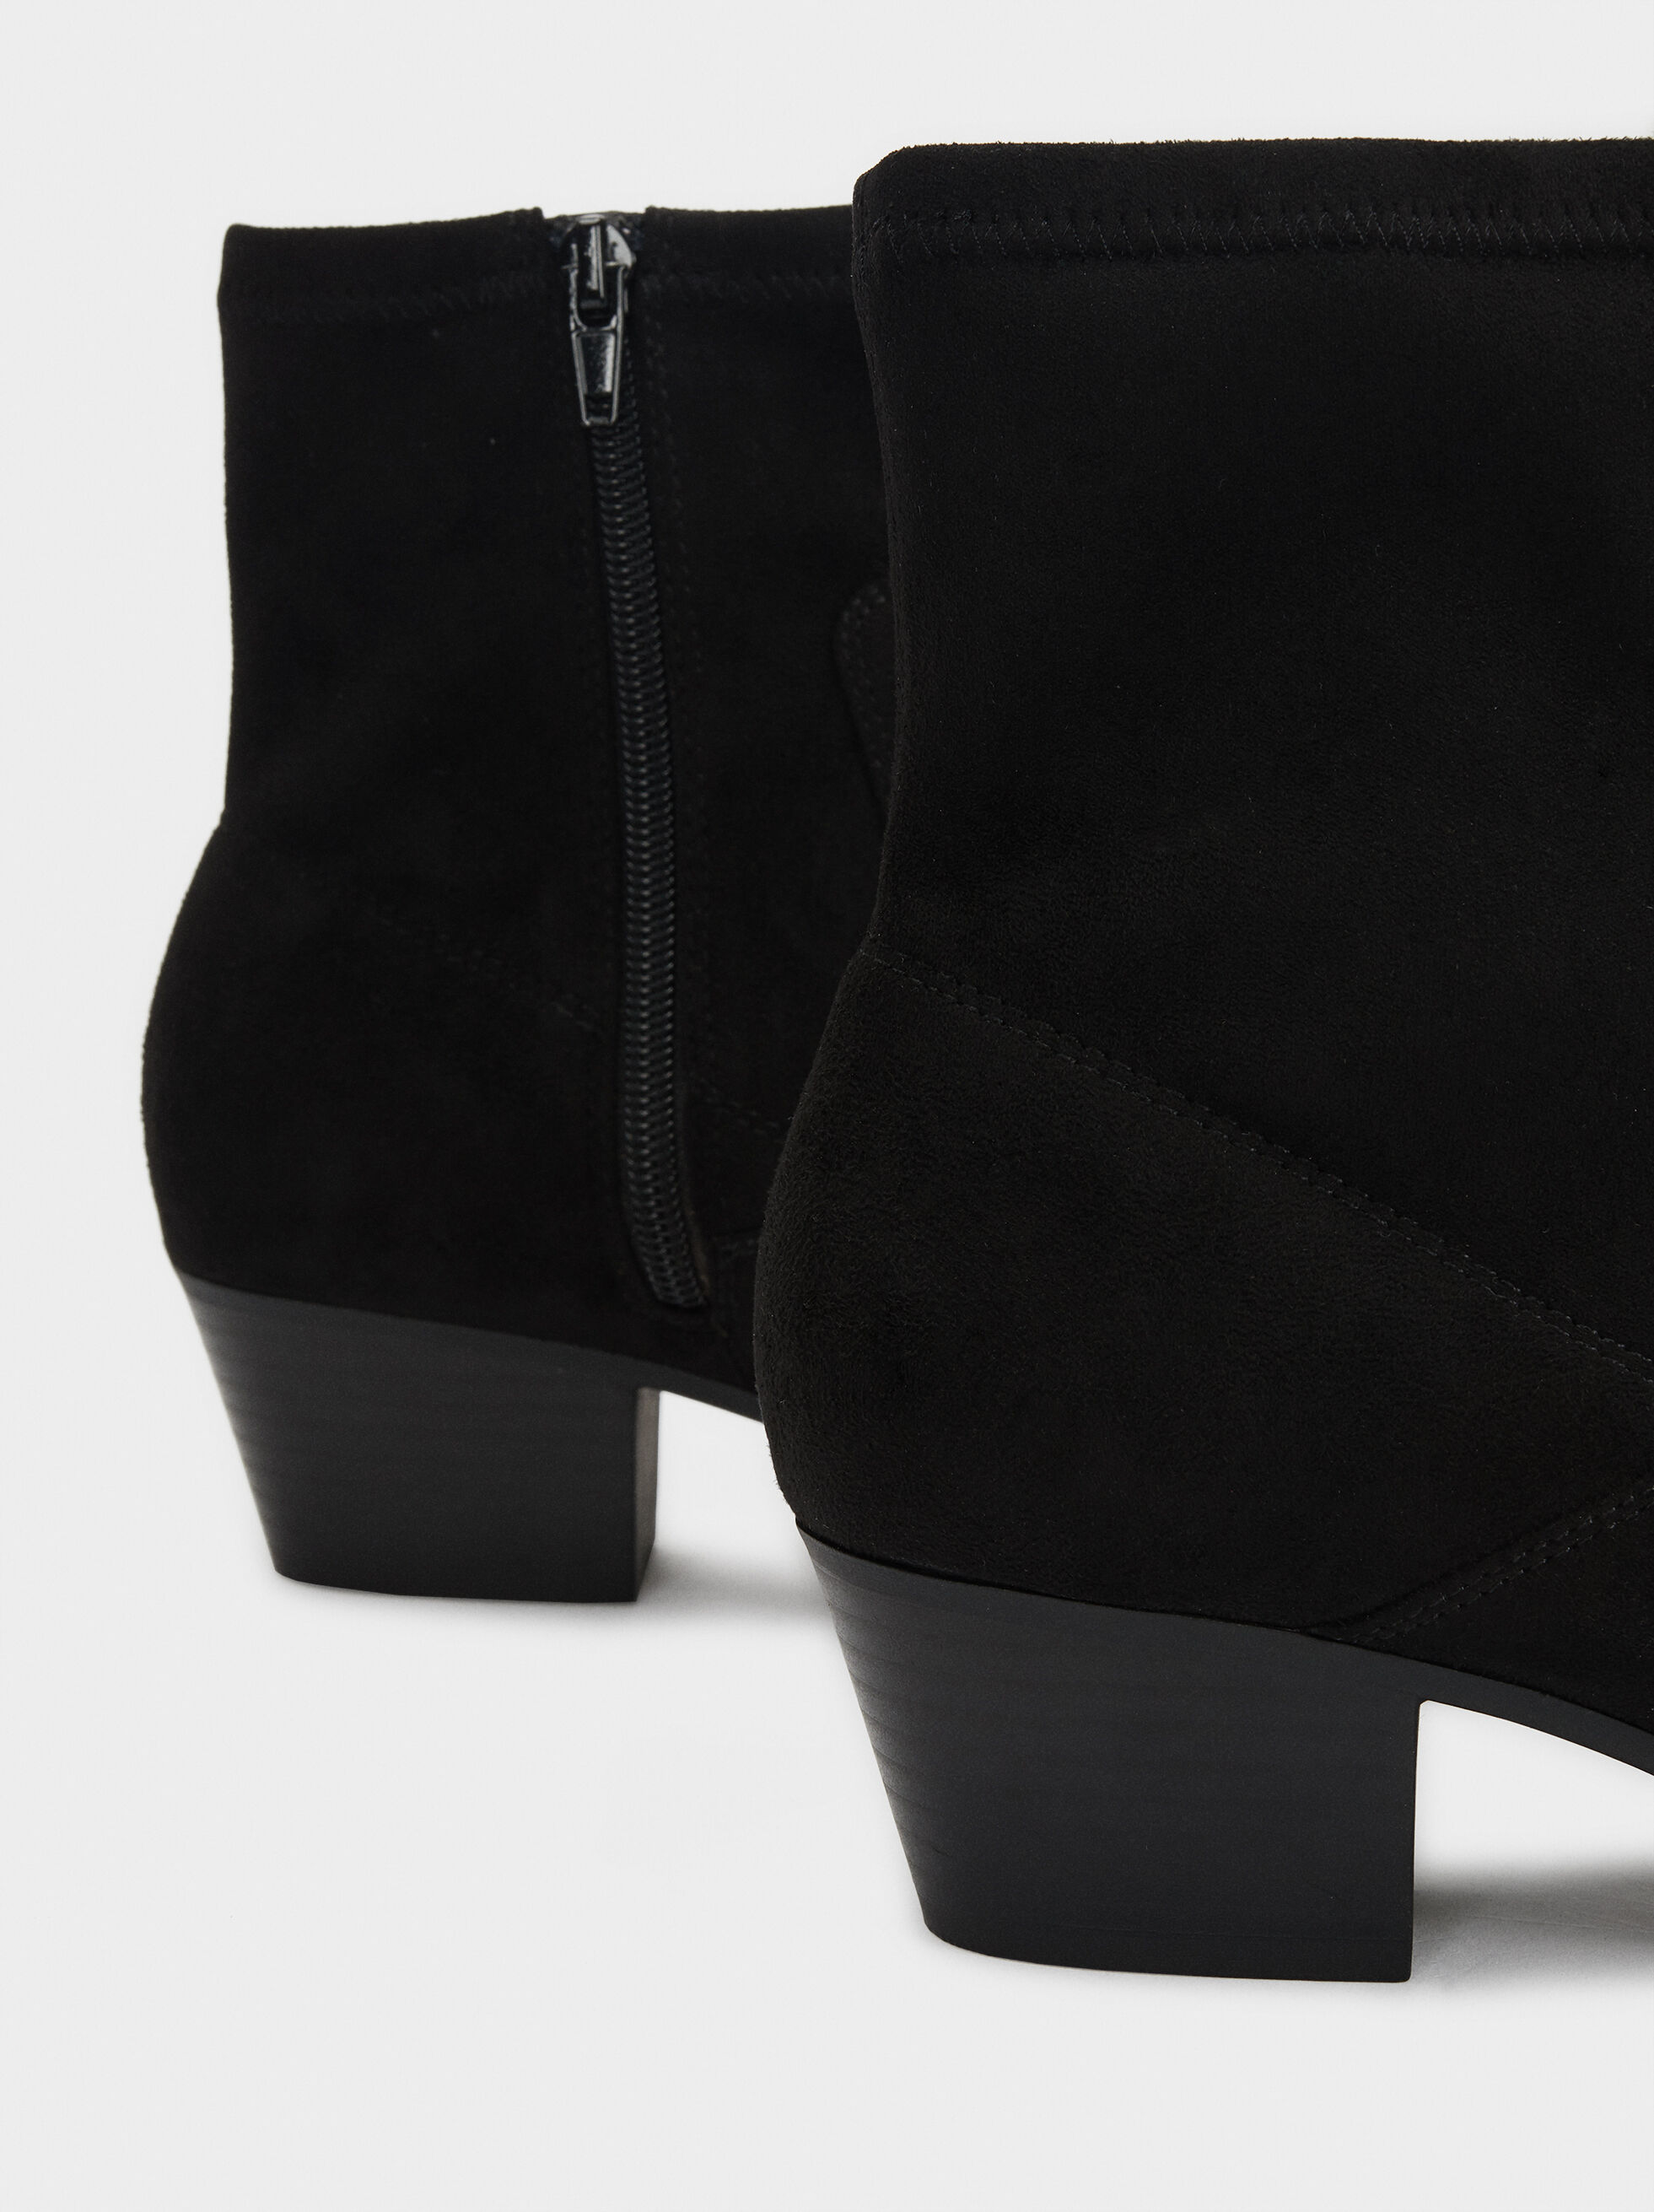 stretch ankle boots black